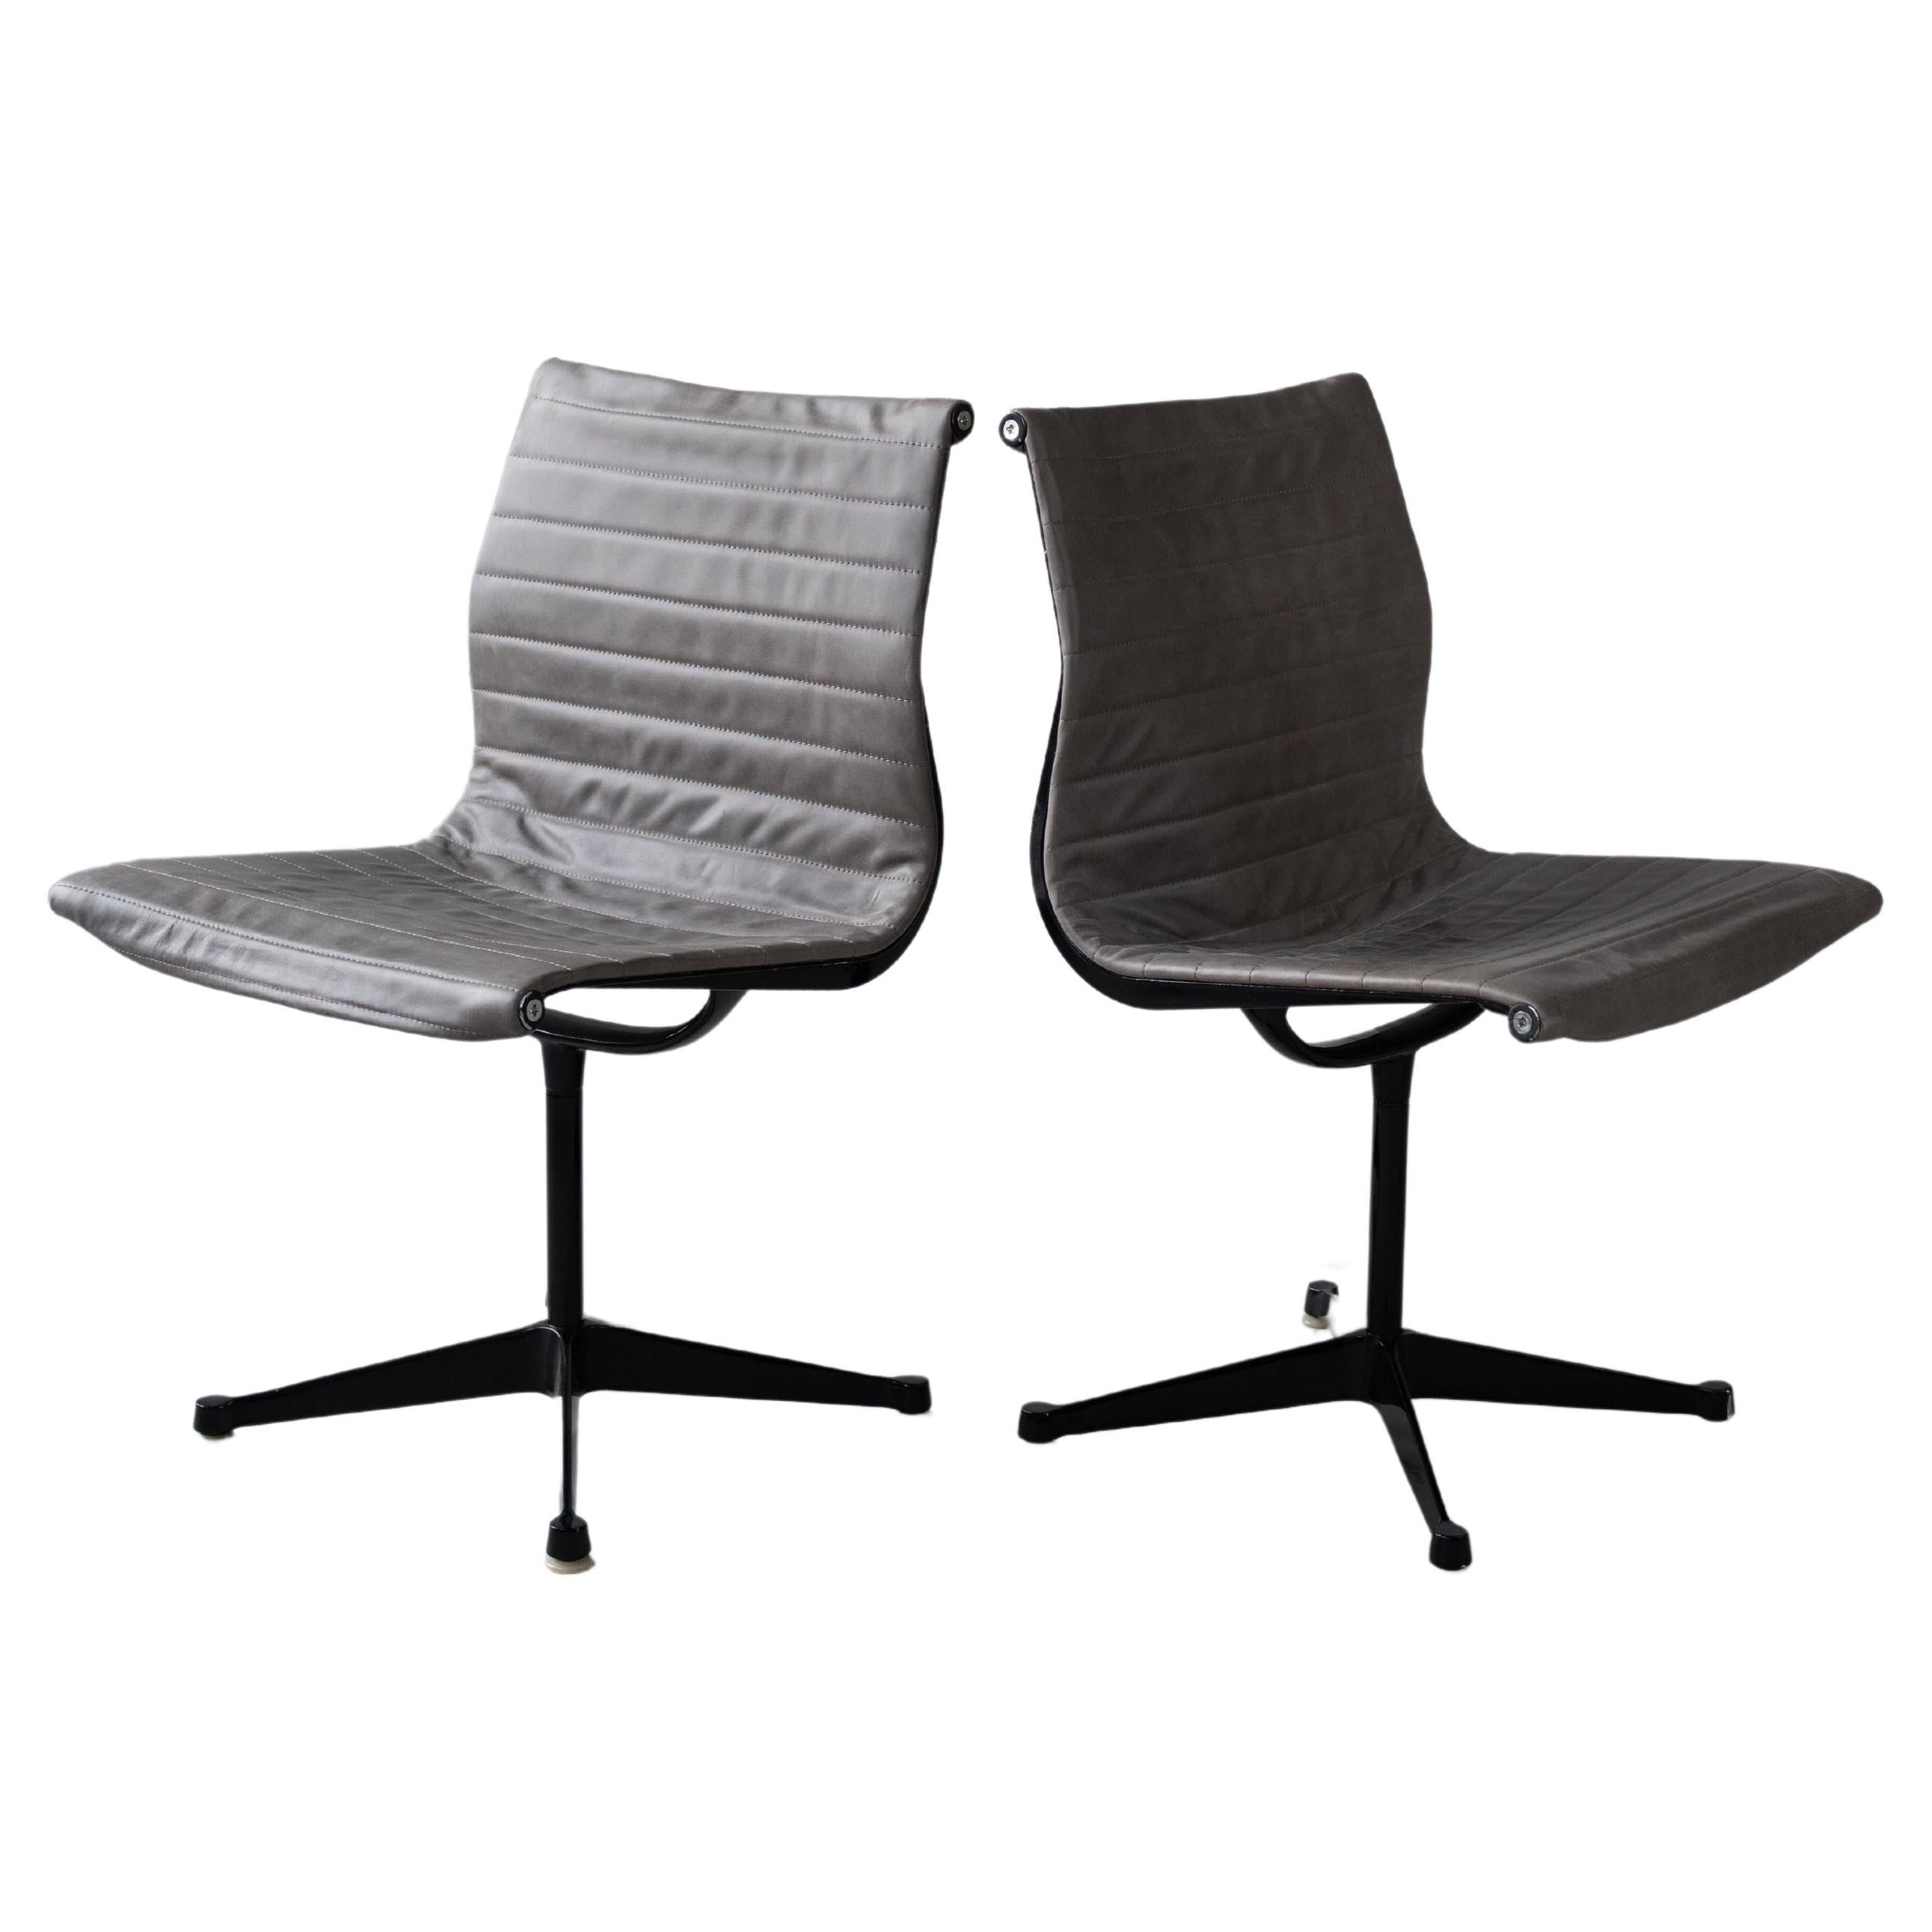 Aluminium chair by Charles and Ray Eames, set of 2 chairs For Sale